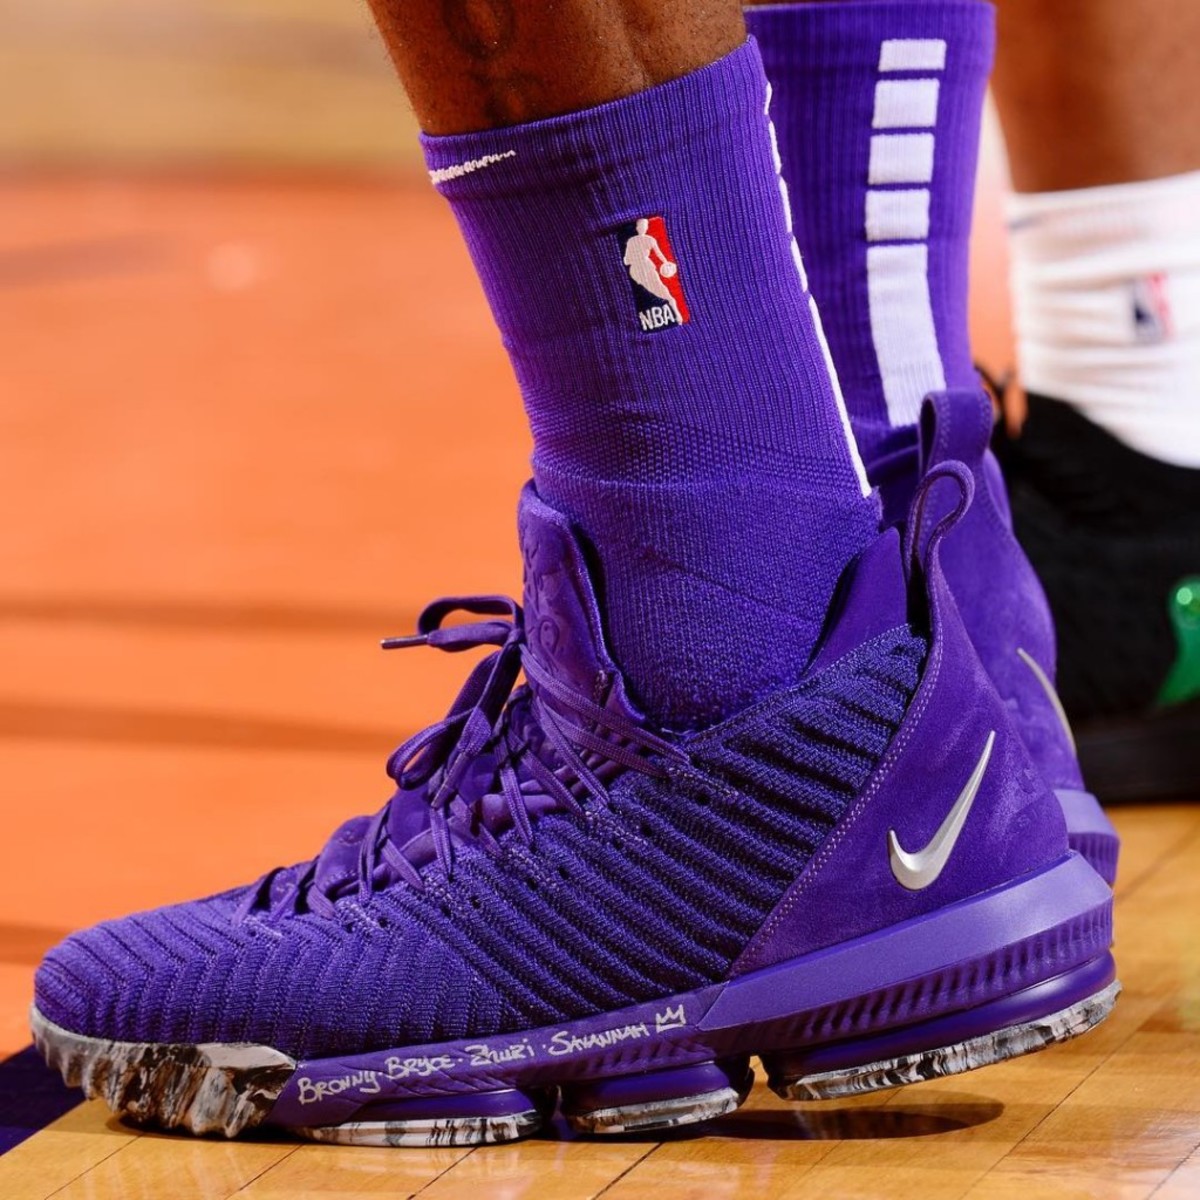 Top 10 Best Looking Basketball Shoes 